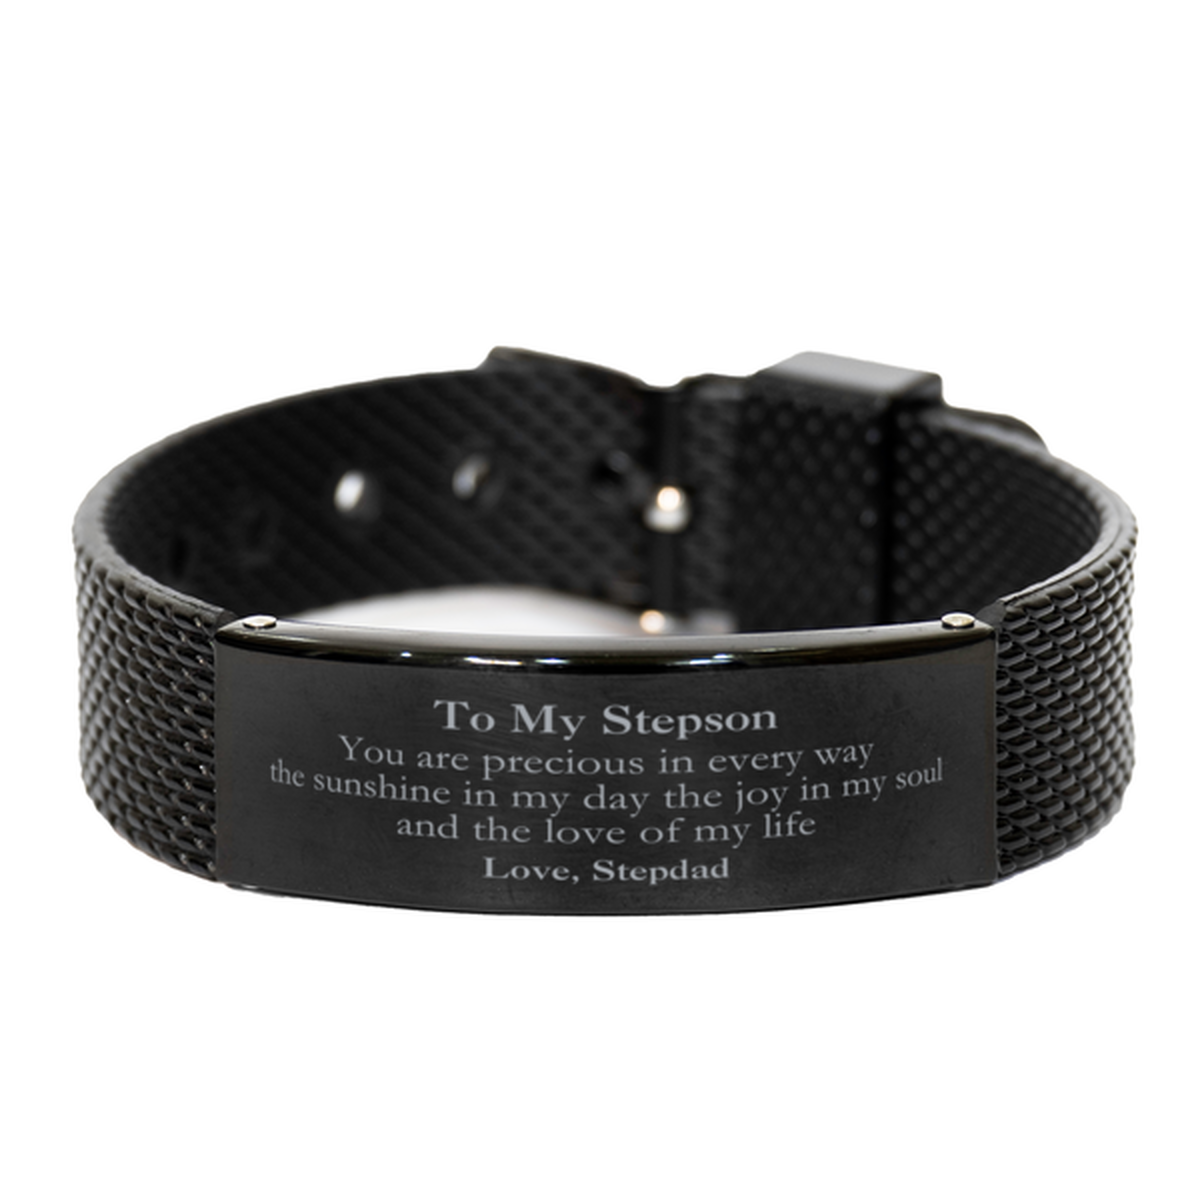 Graduation Gifts for Stepson Black Shark Mesh Bracelet Present from Stepdad, Christmas Stepson Birthday Gifts Stepson You are precious in every way the sunshine in my day. Love, Stepdad